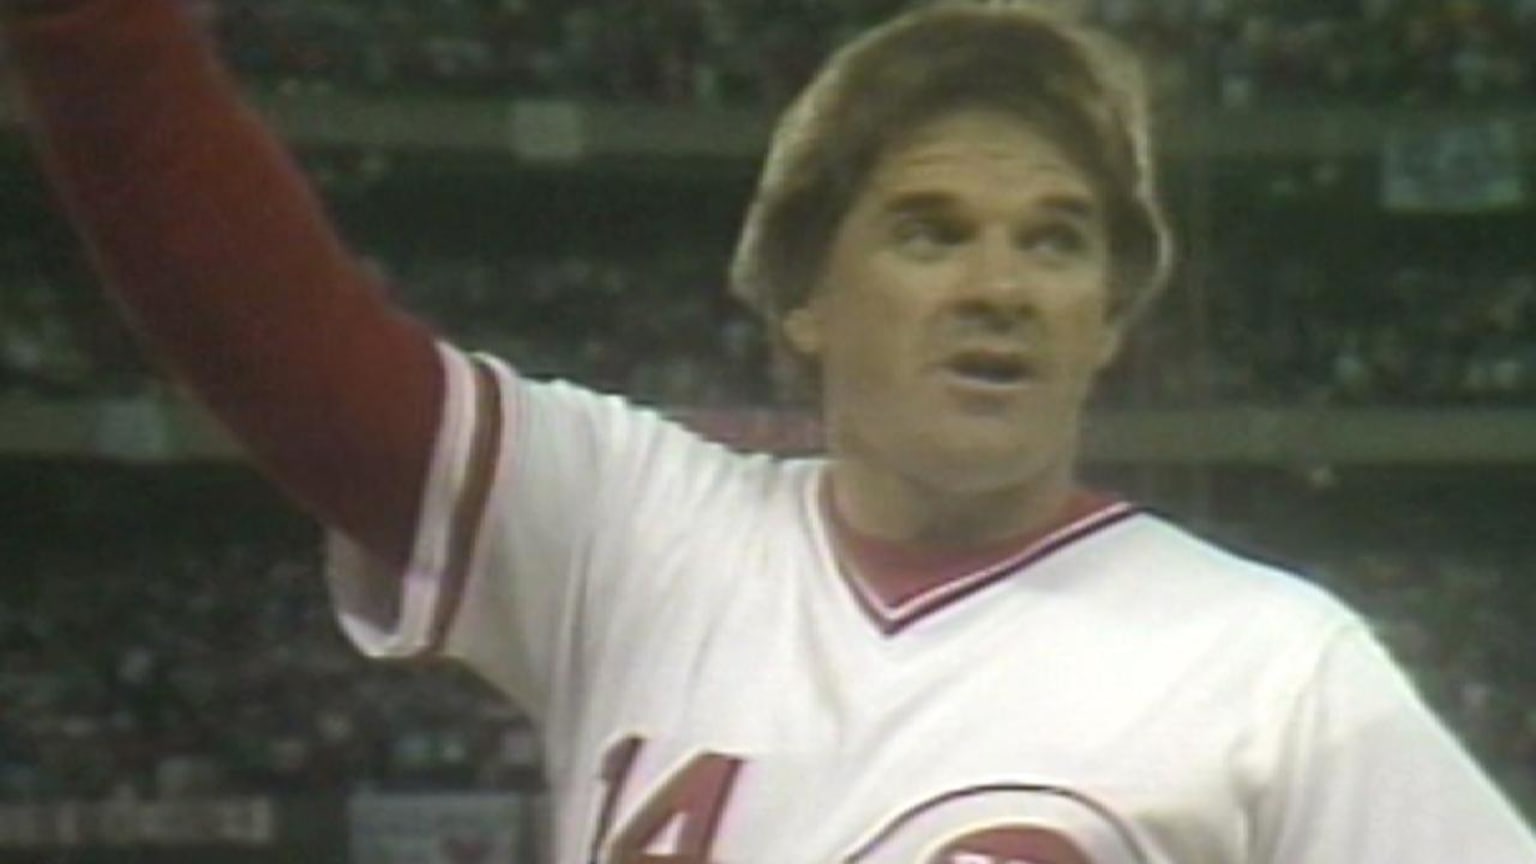 pete-rose-becomes-the-hit-king-09-11-1985-mlb